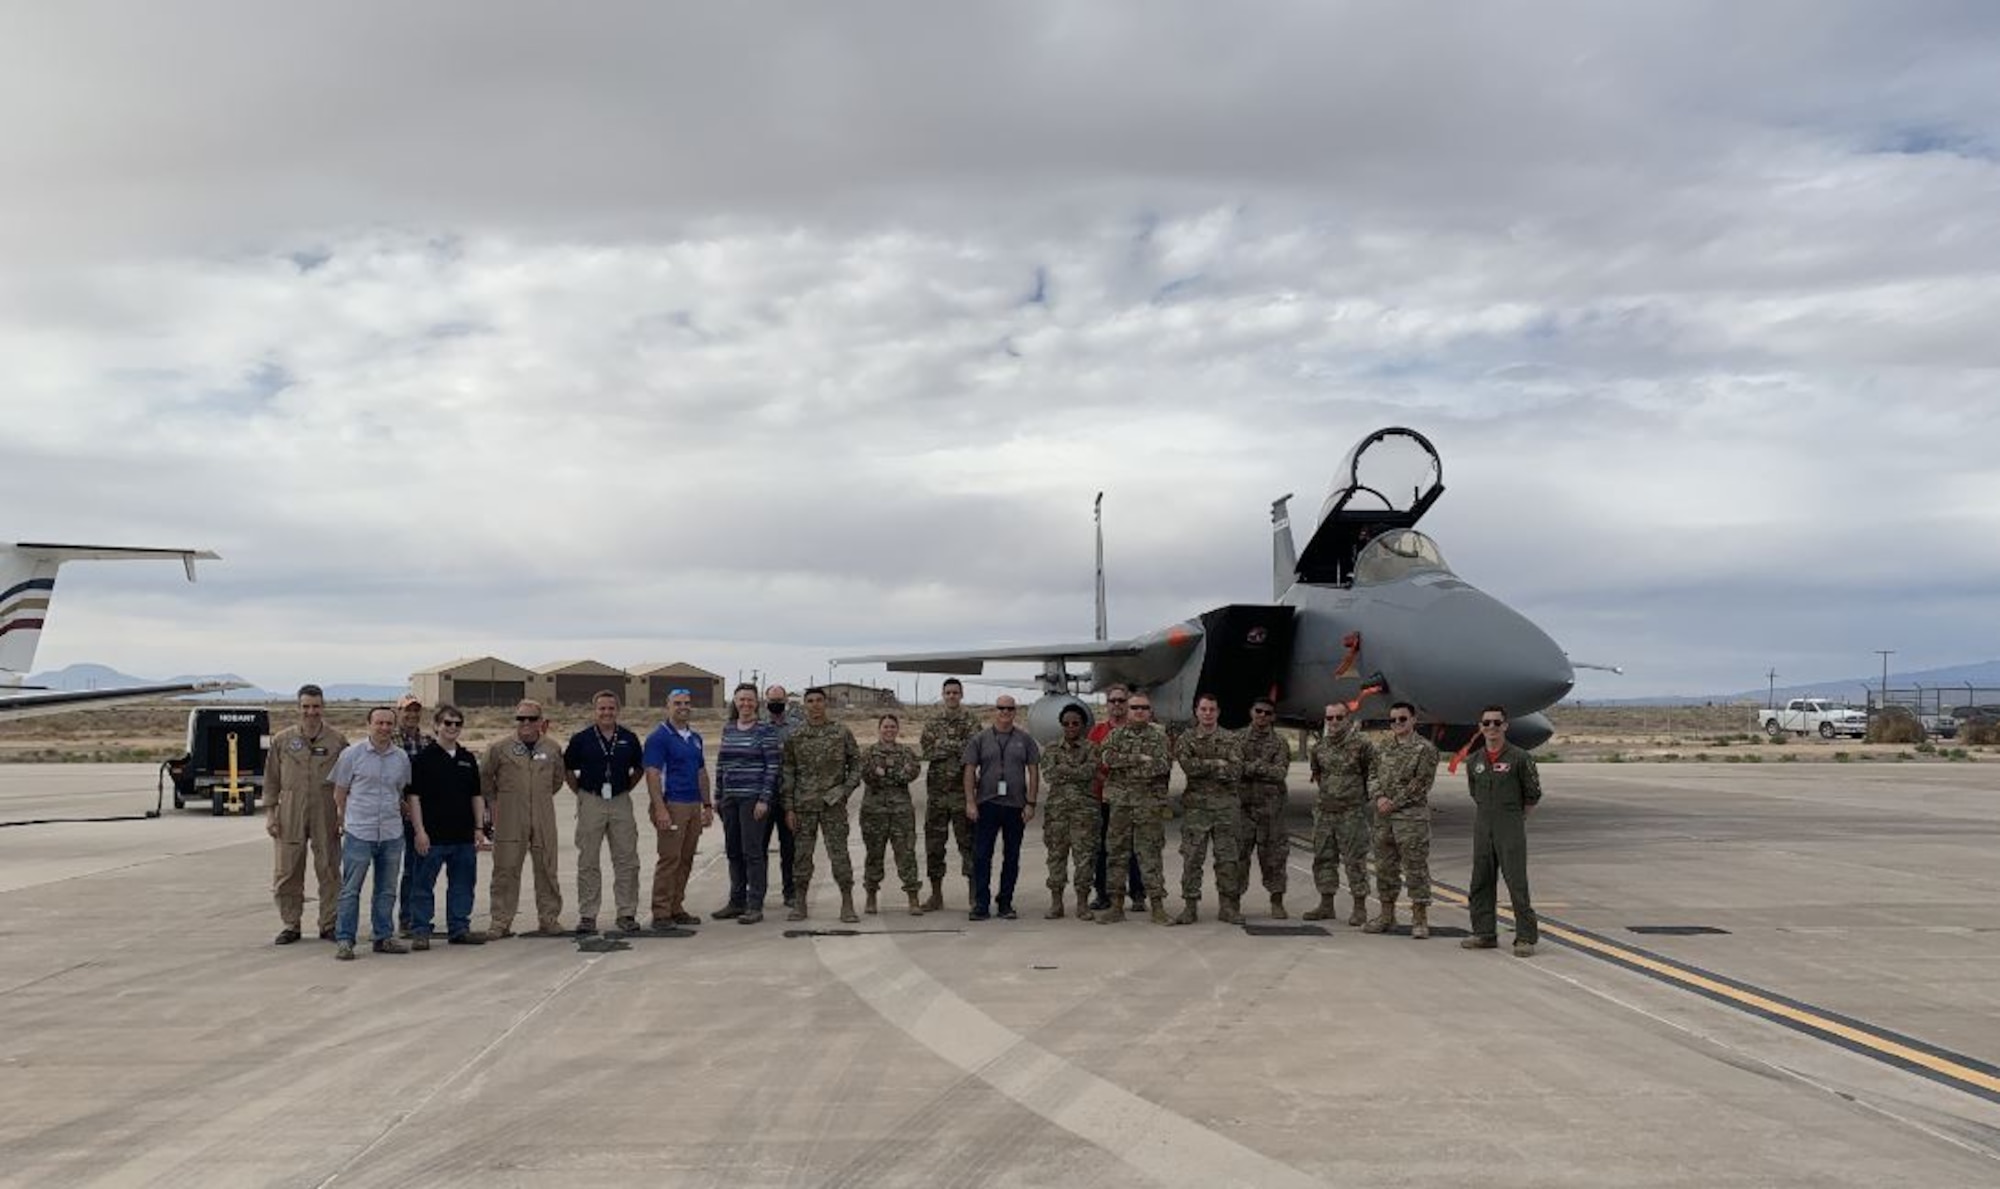 Members of the Tactical Data Link Enhancements Team, located at Hanscom Air Force Base Mass., pose in front of an F-15 at Holloman Air Force Base, N.M., in May. The team was conducting tests of their Heimdall tactical data link technology, which improves real-time information sharing and overall fighter performance in highly contested, near-peer environments.